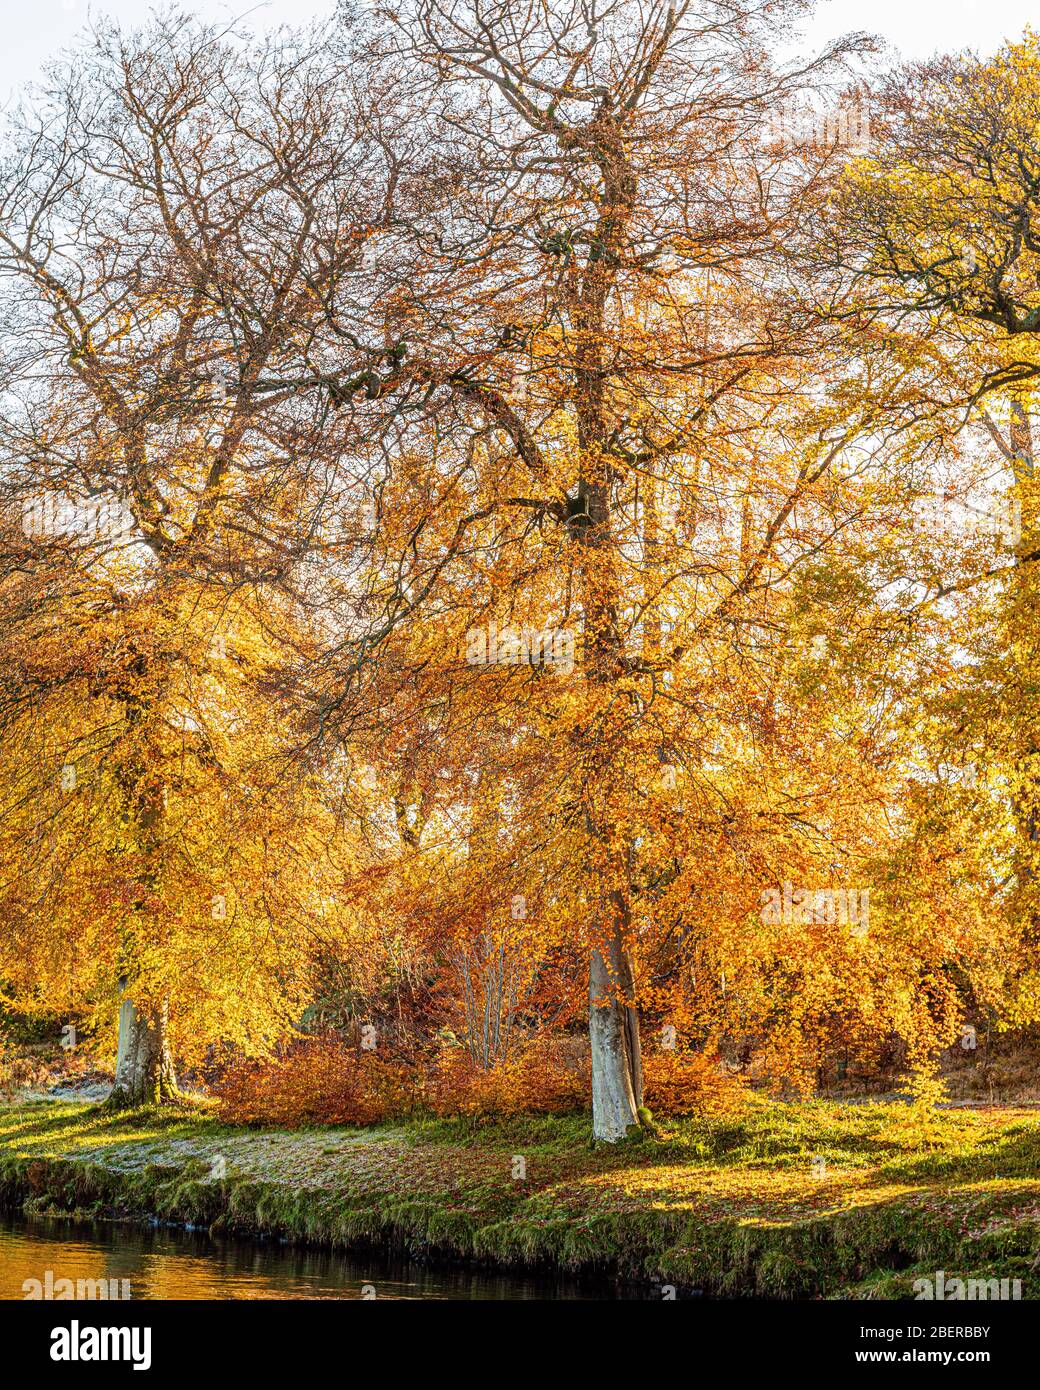 Autumnal scene with yellow, orange and red leaves on trees and    fallen on the ground Doune, Stirling, Scotland Stock Photo